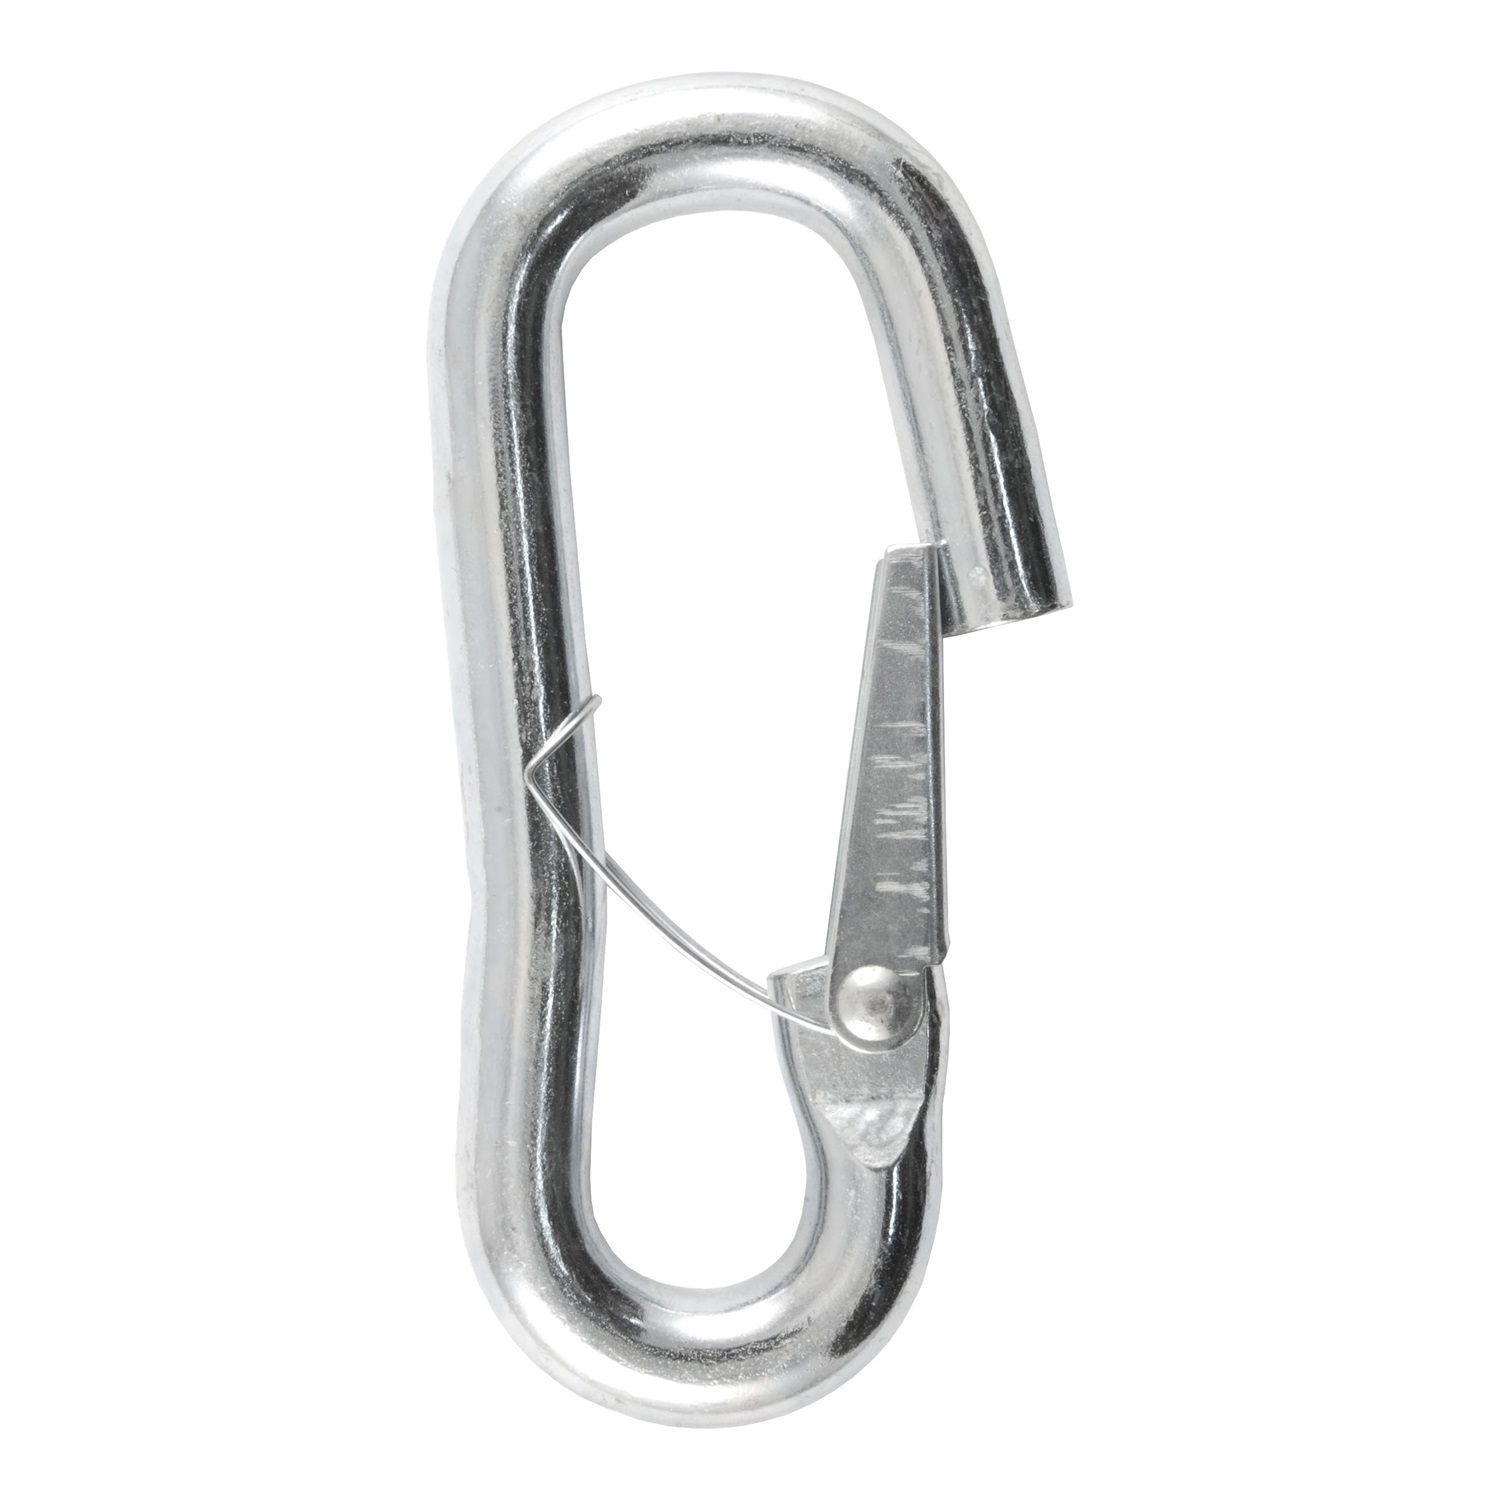 CURT Manufacturing CURT Manufacturing 81281 Class III; S-Hook w/Safety Latch  Fits